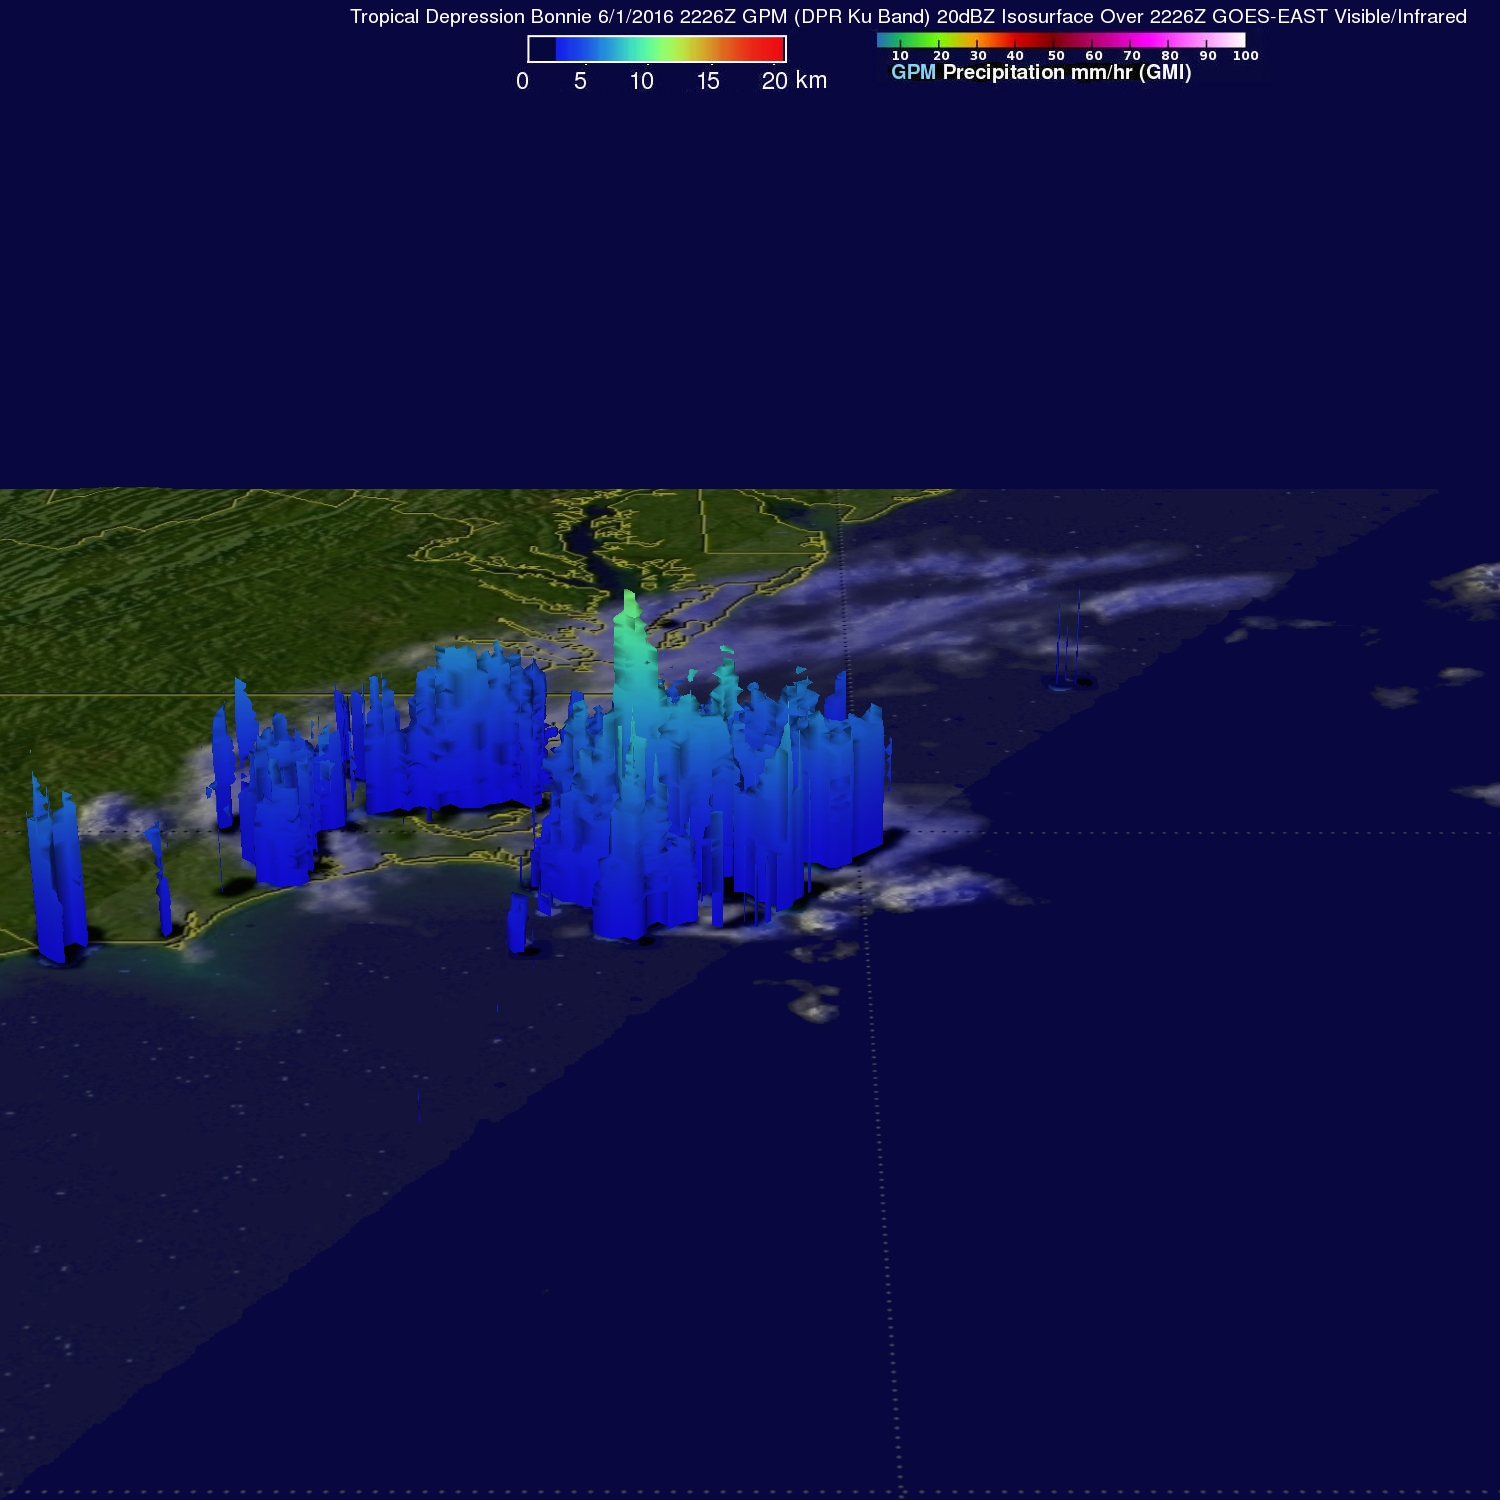 rainfall totals observed by GPM in Bonnie